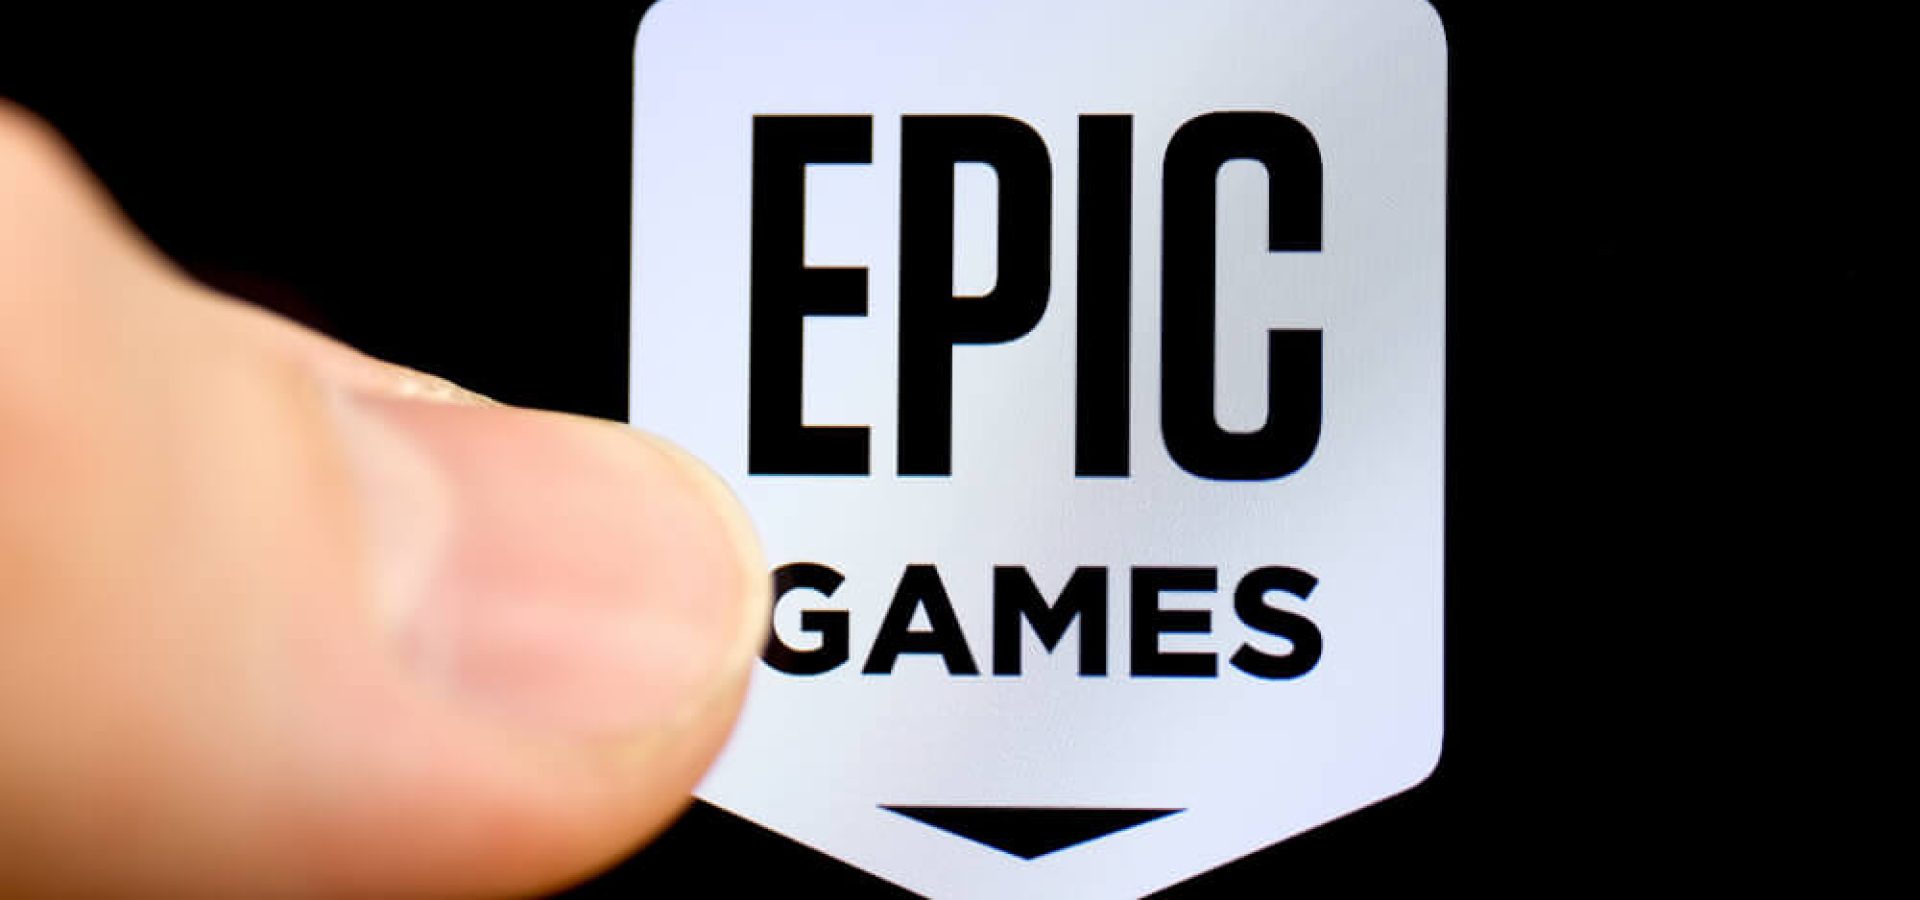 American company Epic Games on the smartphone with finger.